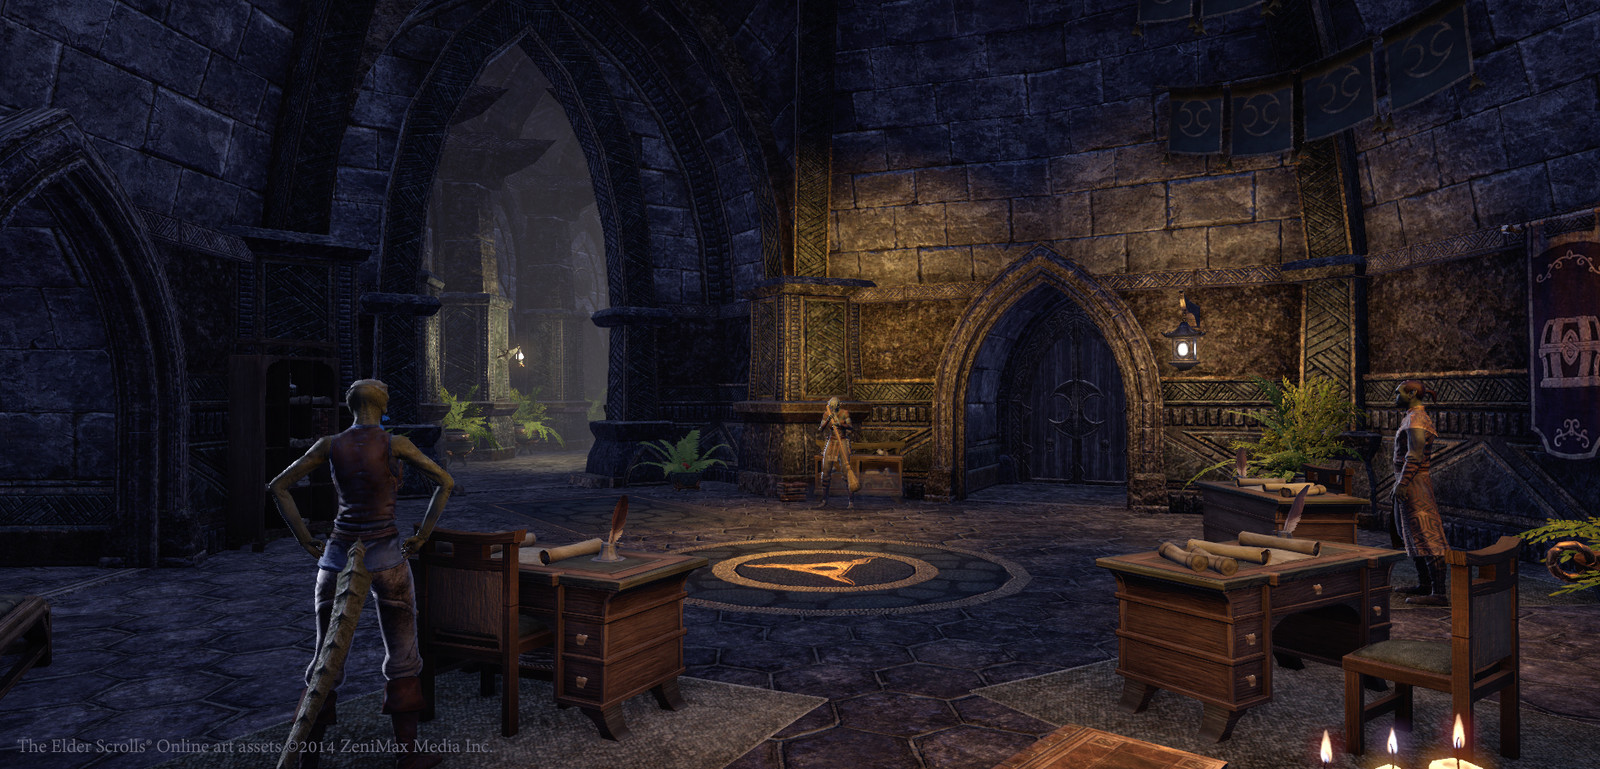 Dunmer kinhouse interior. Textures by Neal jany. Characters by others.